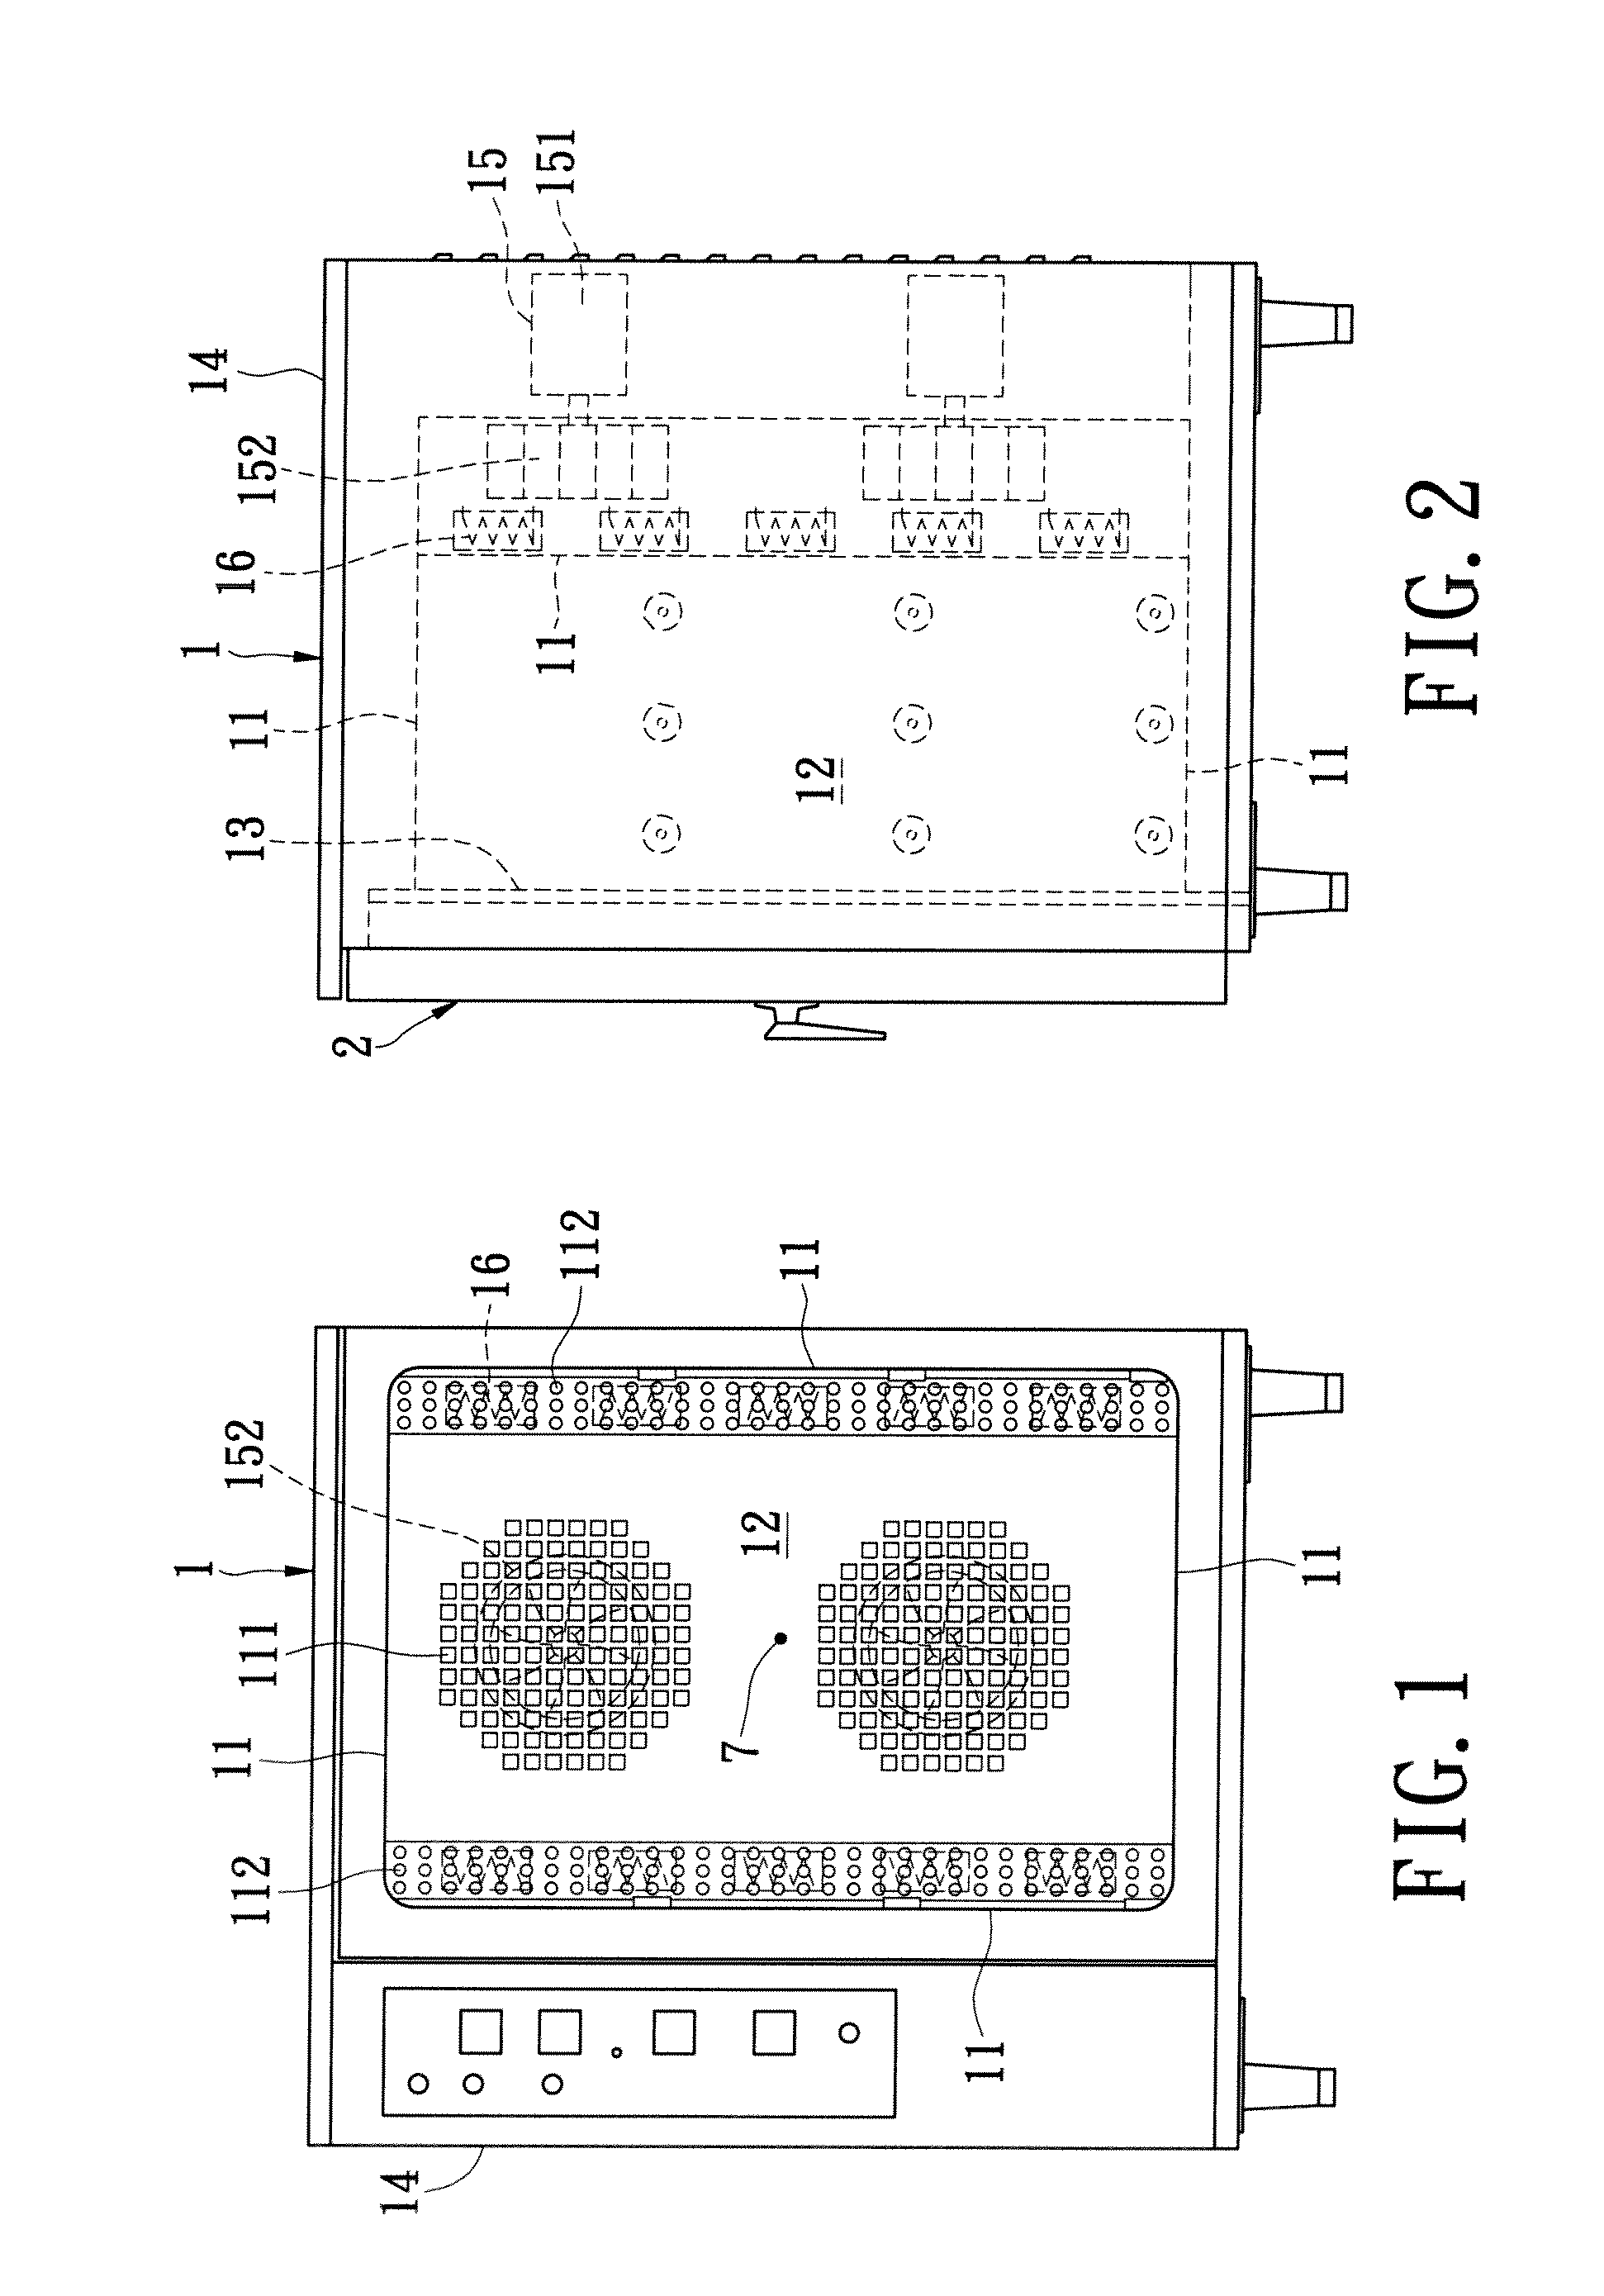 Heating device having a function of dynamical temperature-control